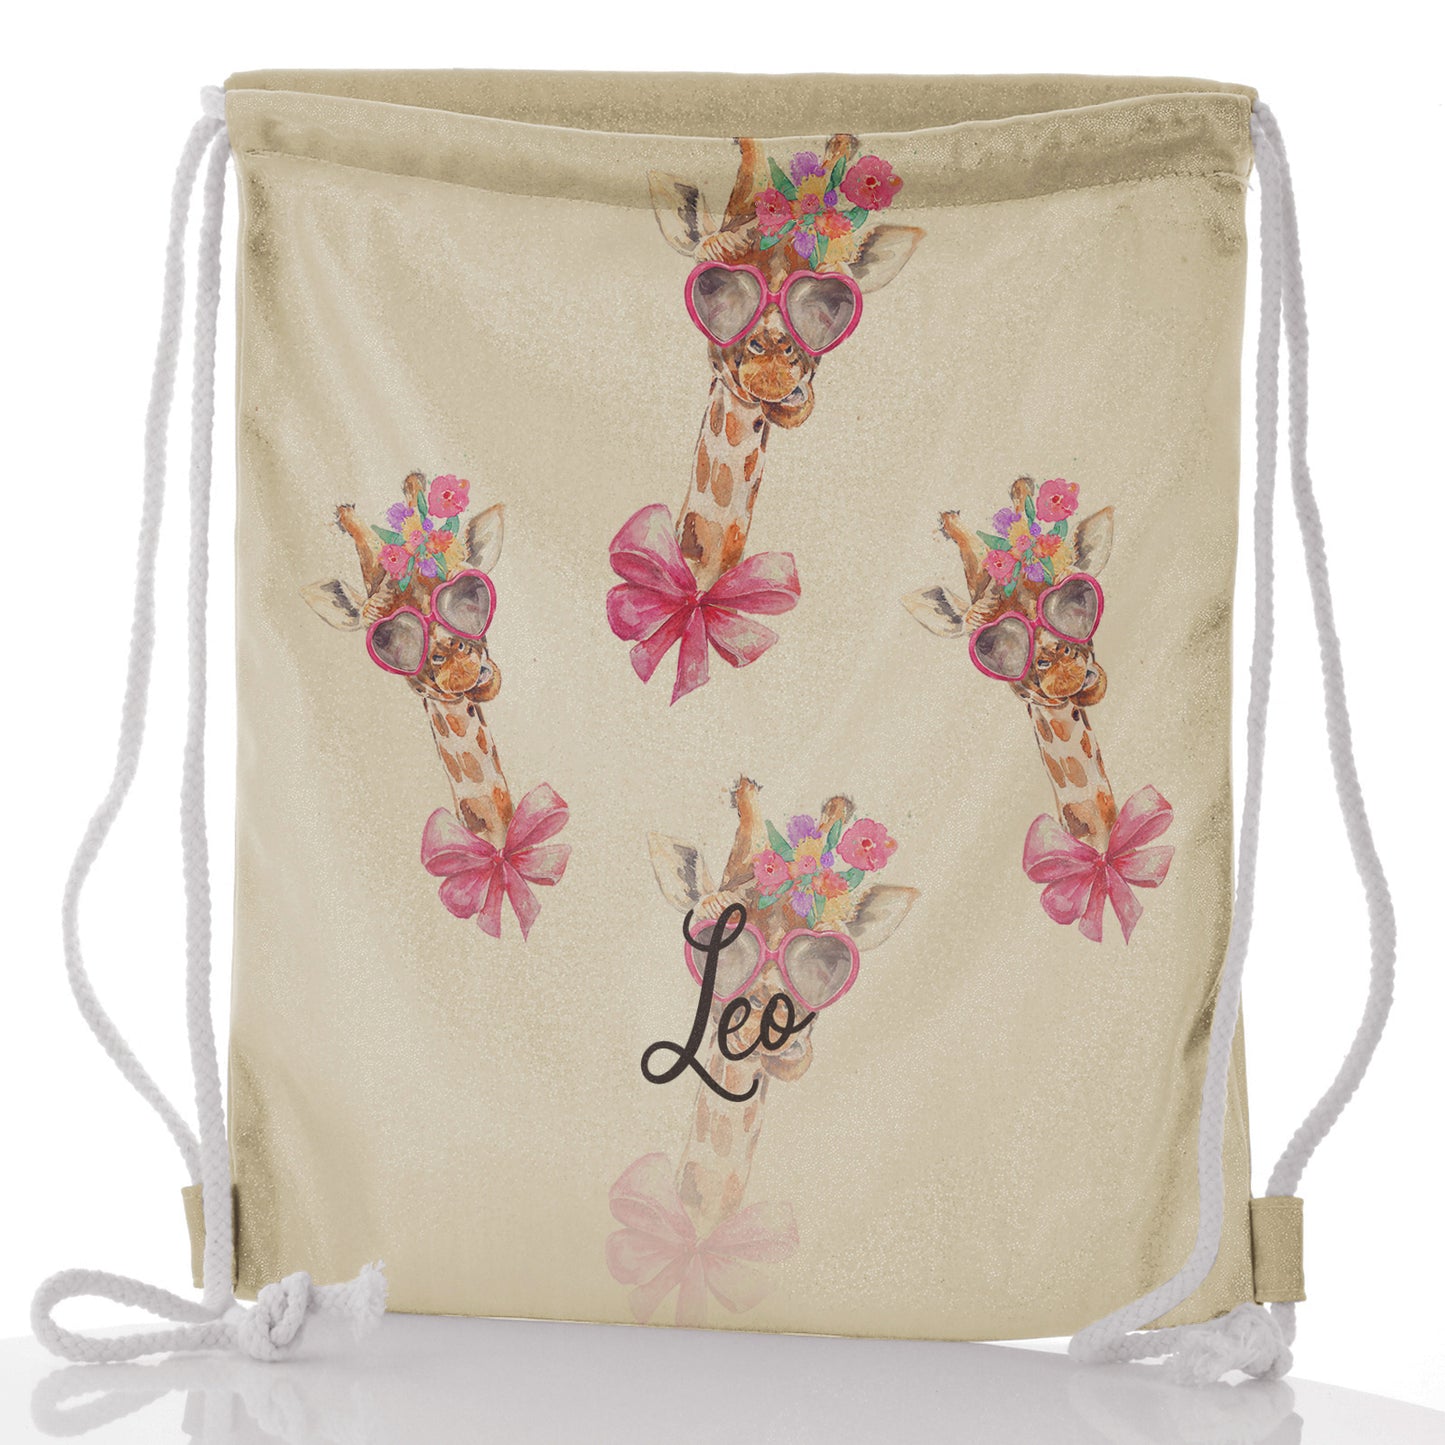 Personalised Glitter Drawstring Backpack with Giraffe Pink Bow Multicolour Flowers and Cute Text